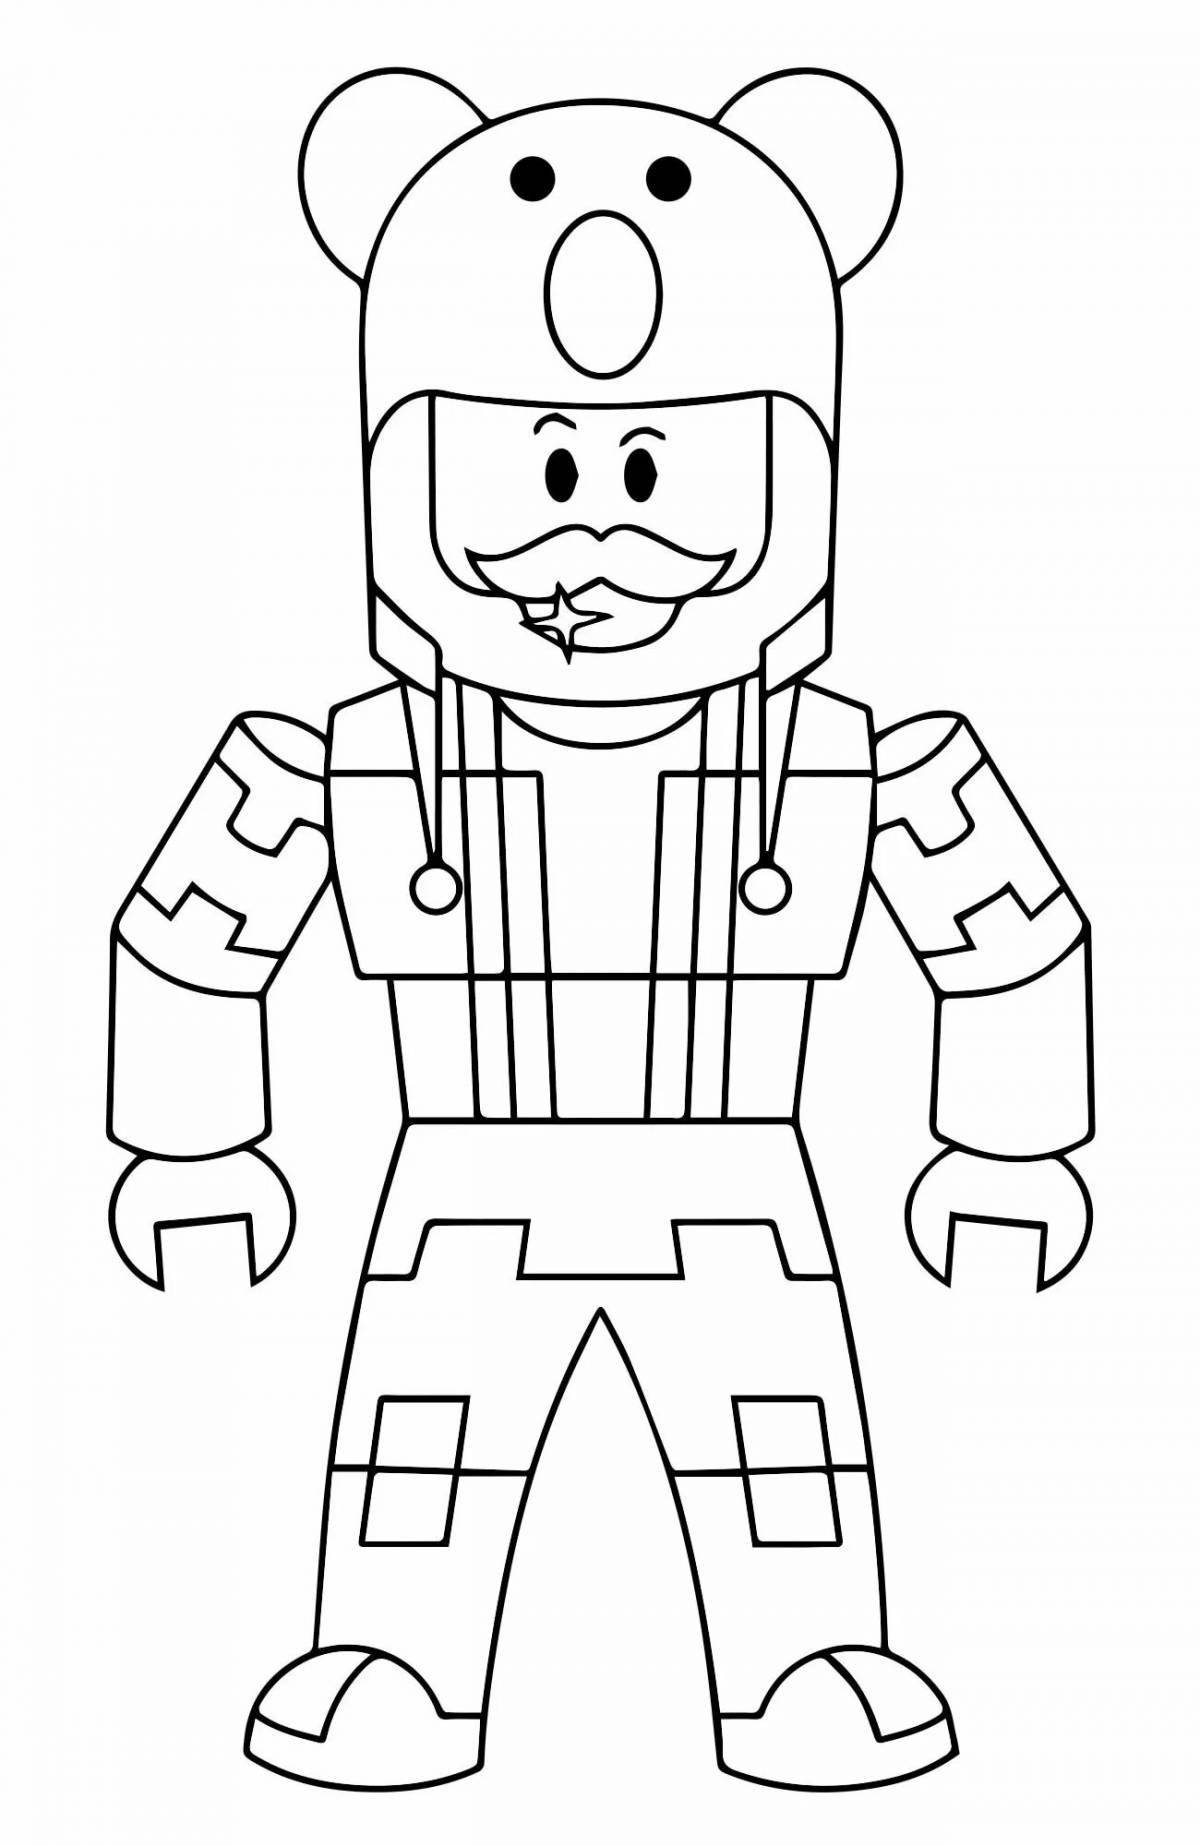 Roblox brave heroes coloring page